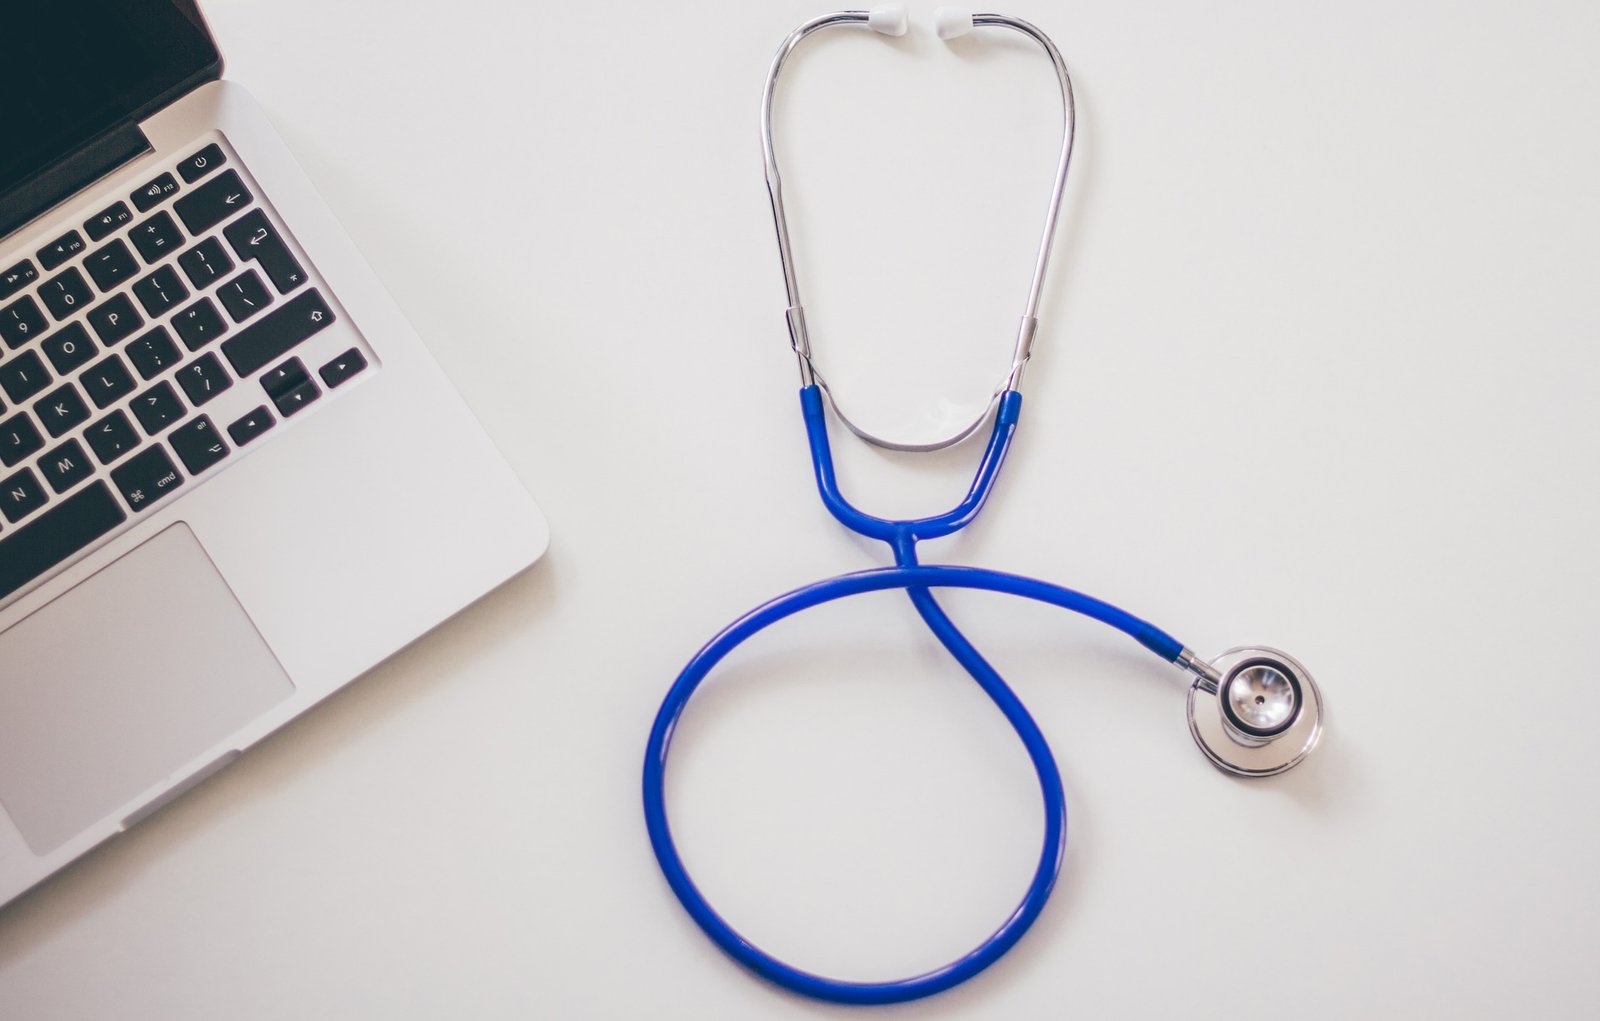 Is online doctor consultation beneficial?